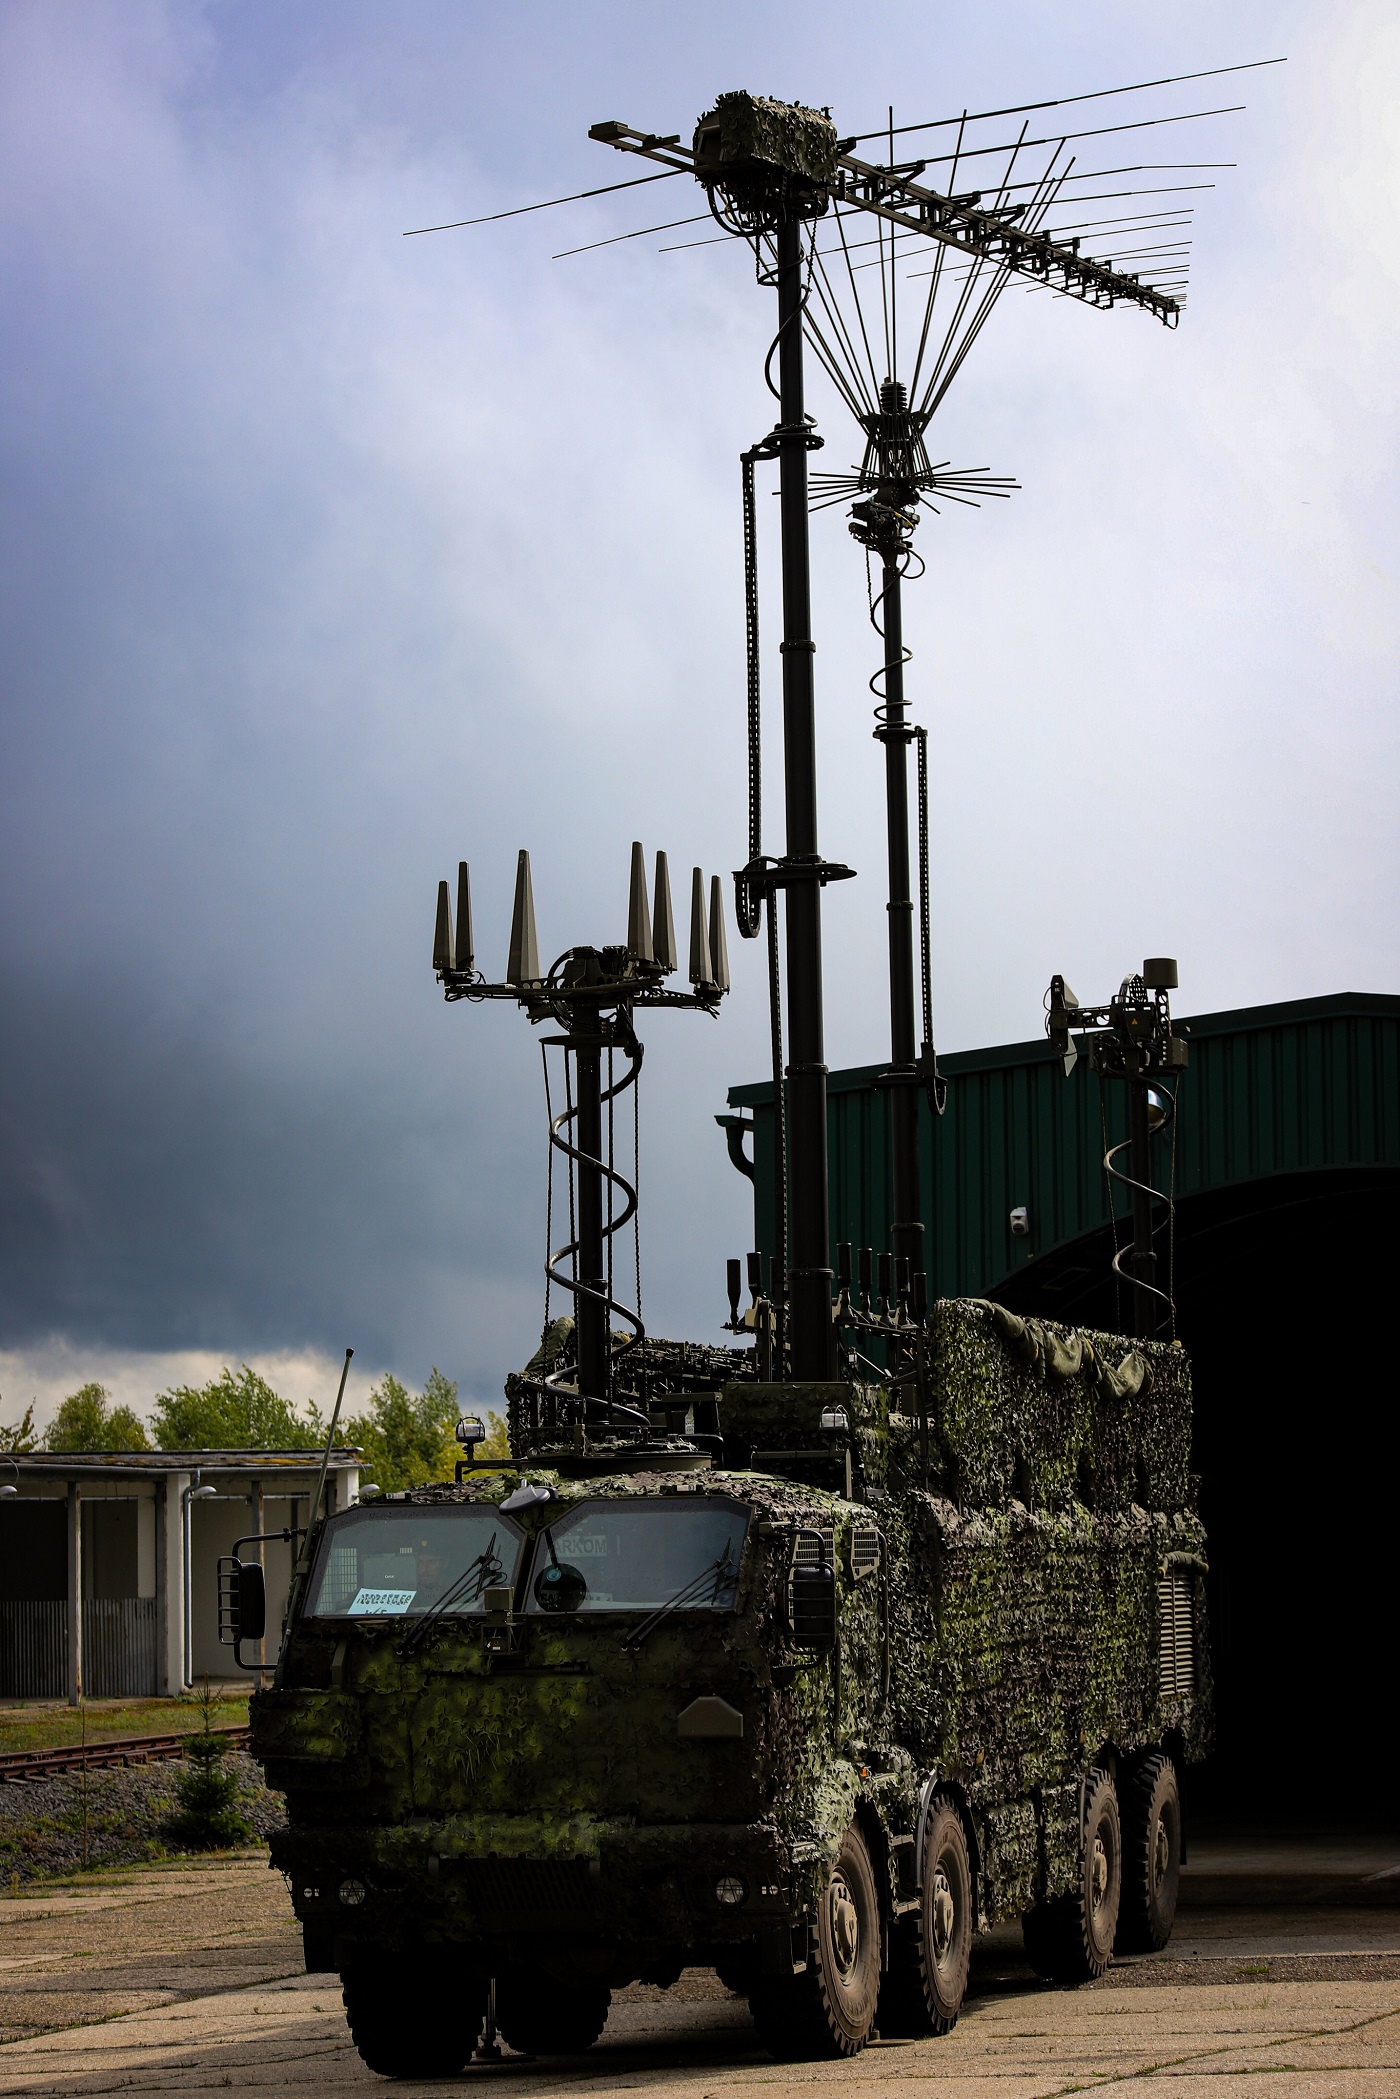 The STARKOM jamming system includes an automatic deployment system of its antennas, coupled with a self-sustaining power supply, which distinguishes it from other electronic warfare systems